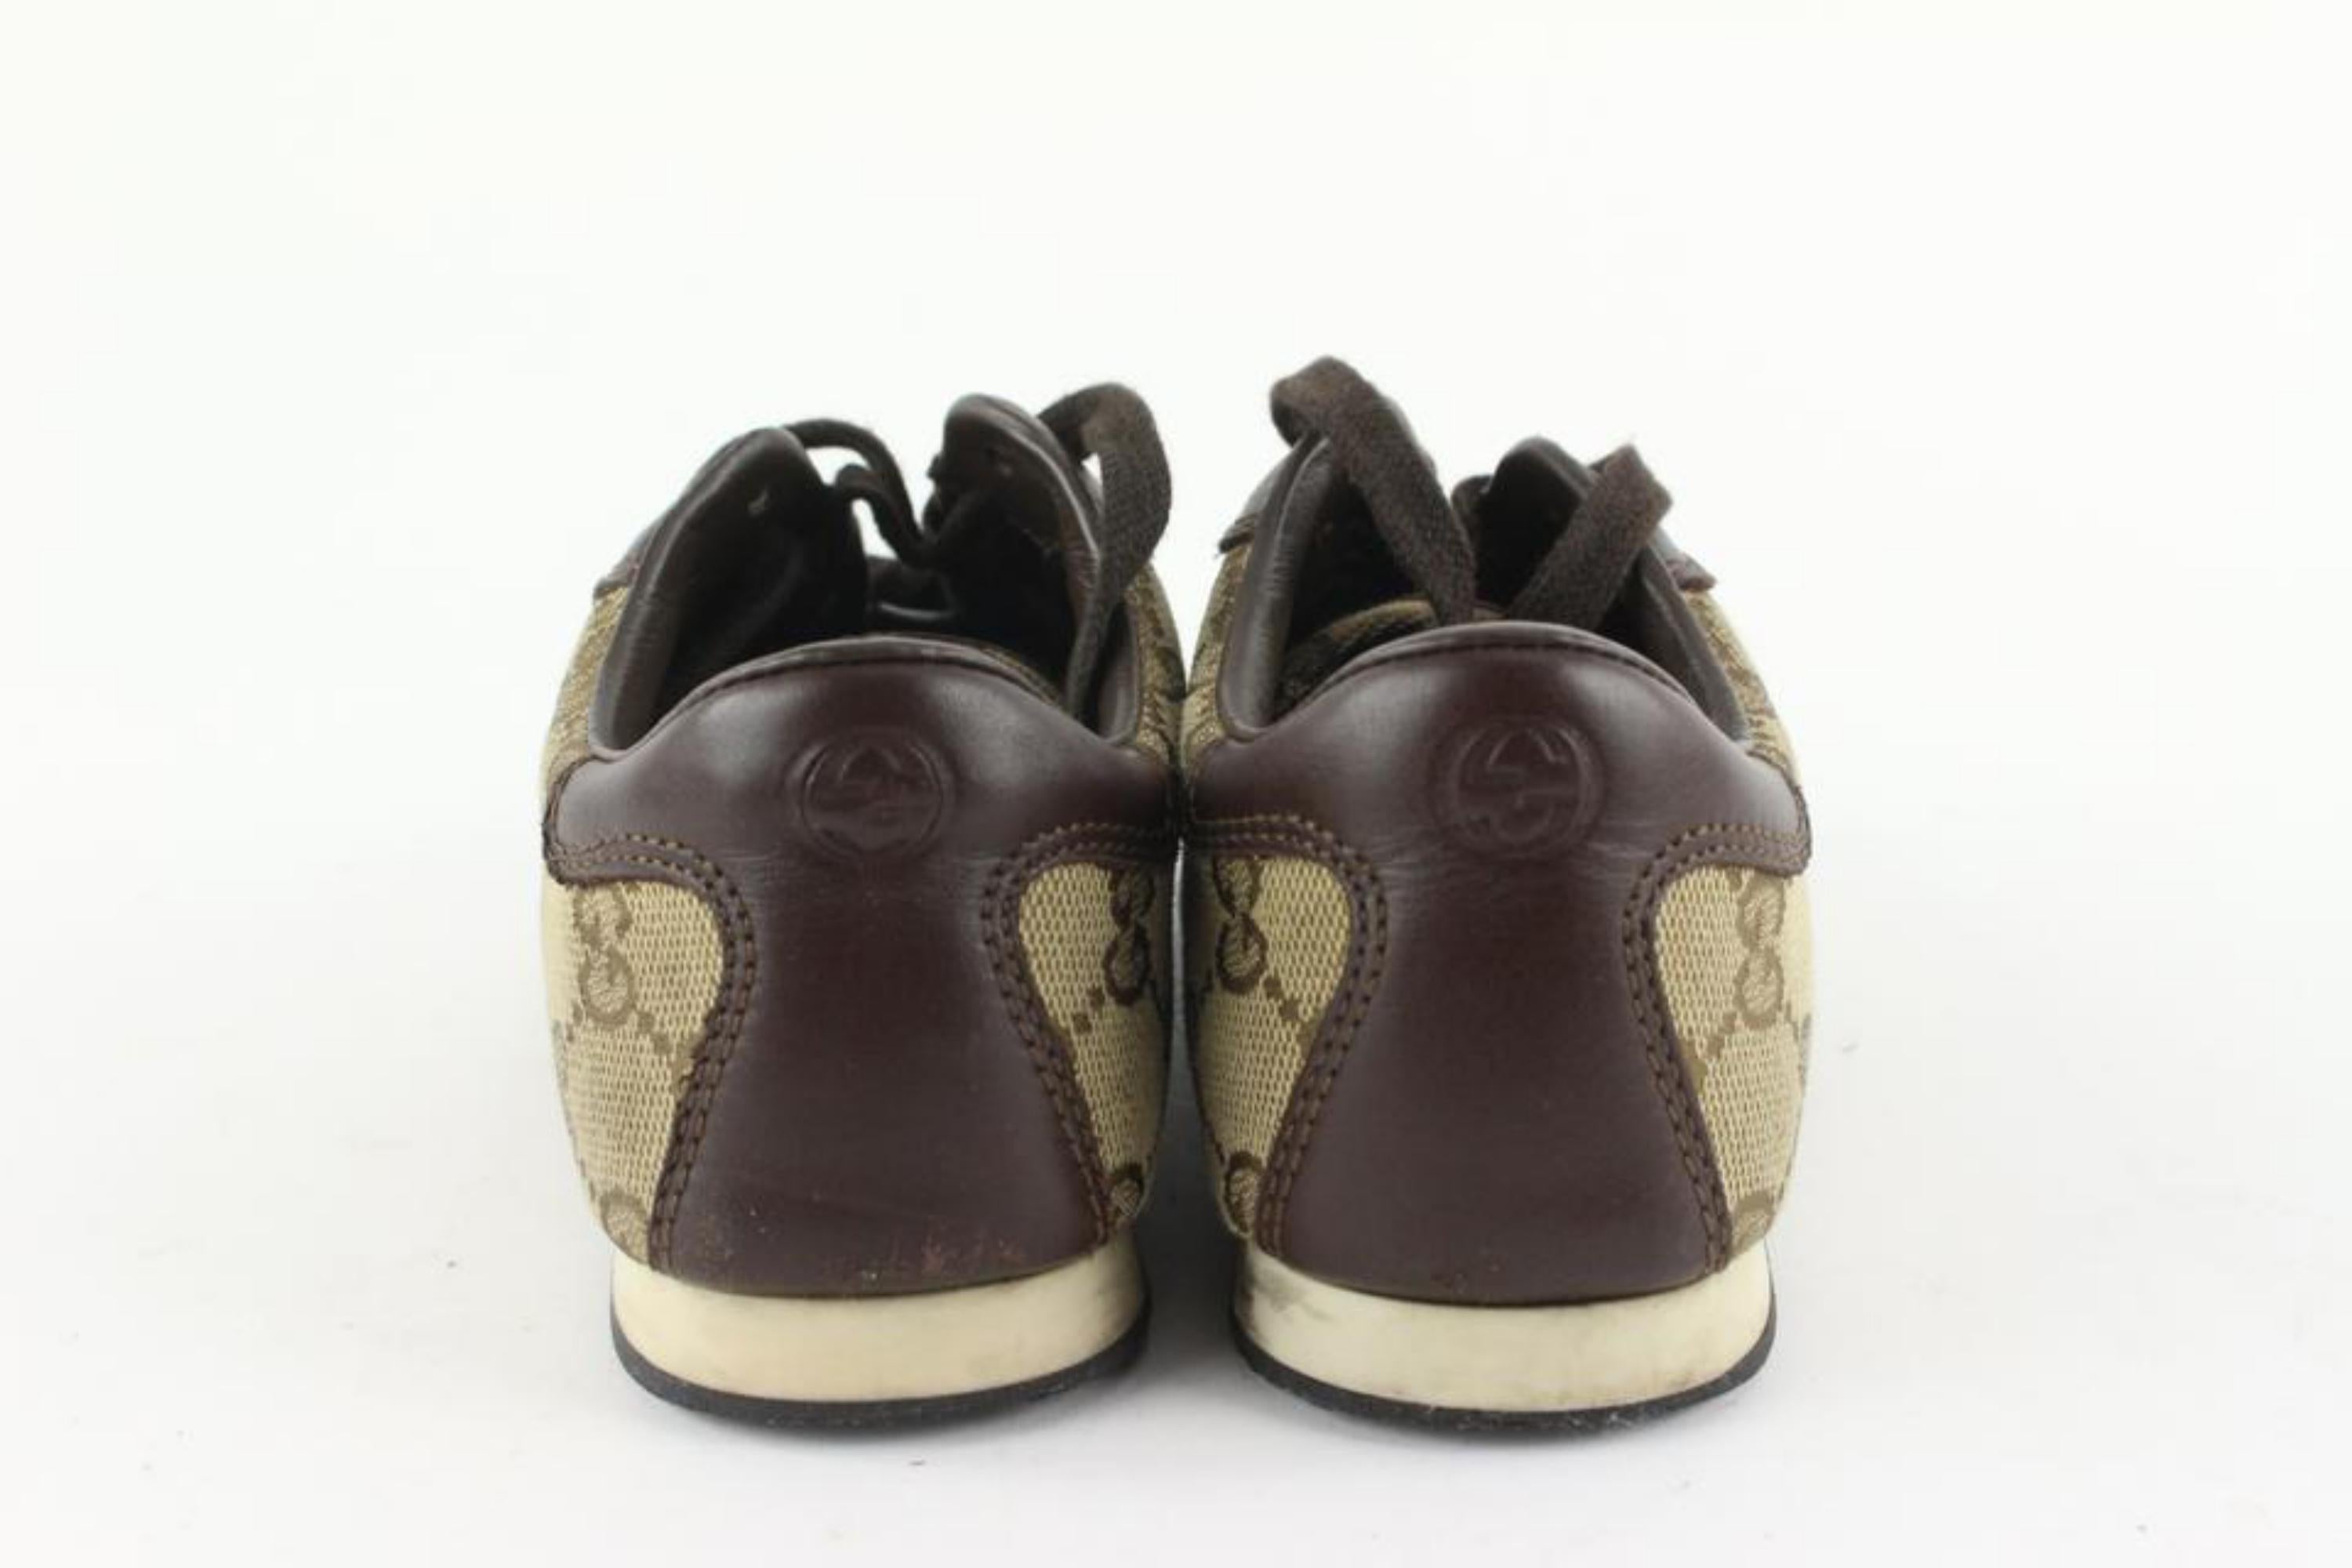 Gucci 1.5 US Kids Size Monogram GG Web Sneaker 322G1G In Good Condition For Sale In Dix hills, NY